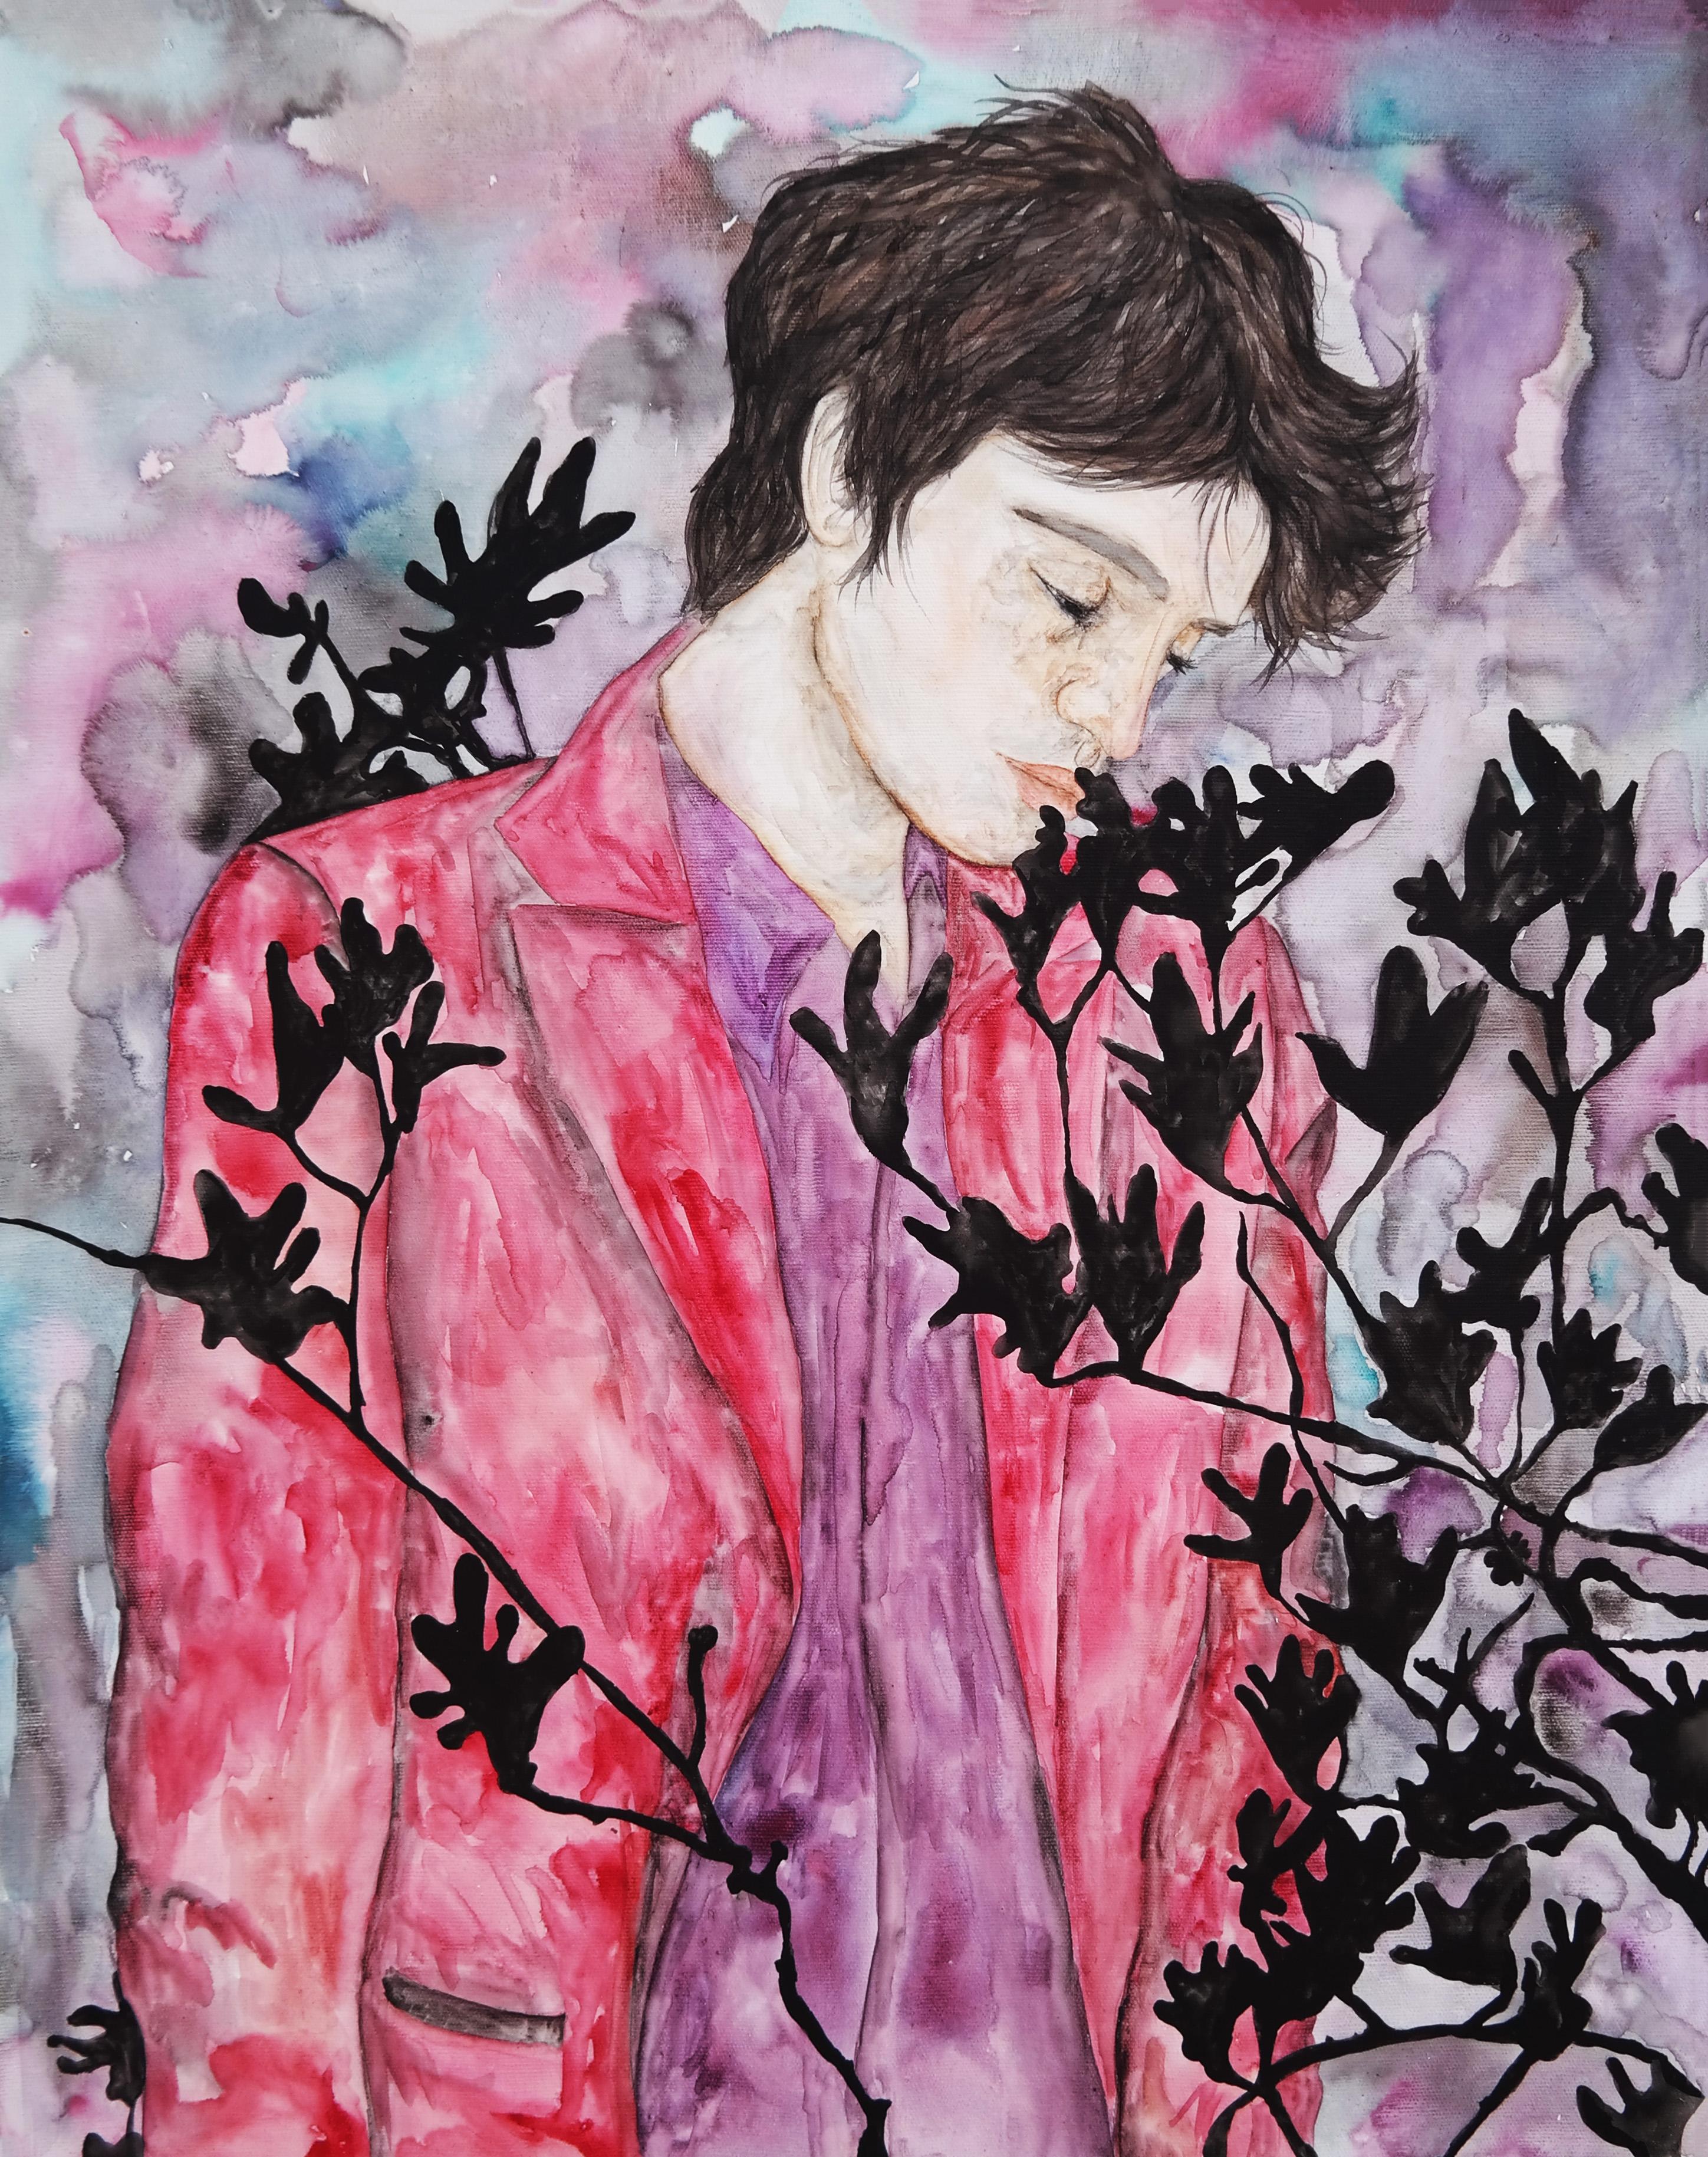 A dandy in the garden of black roses, 2016 by Ramonn Vieitez
Watercolor and Gouache on canvas
Size: 19.7 H x 15.7 W in.
Signed on the back by the artist
Unframed

___

Ramonn Vieitez is a self-taught Brazilian artist who primarily utilizes painting